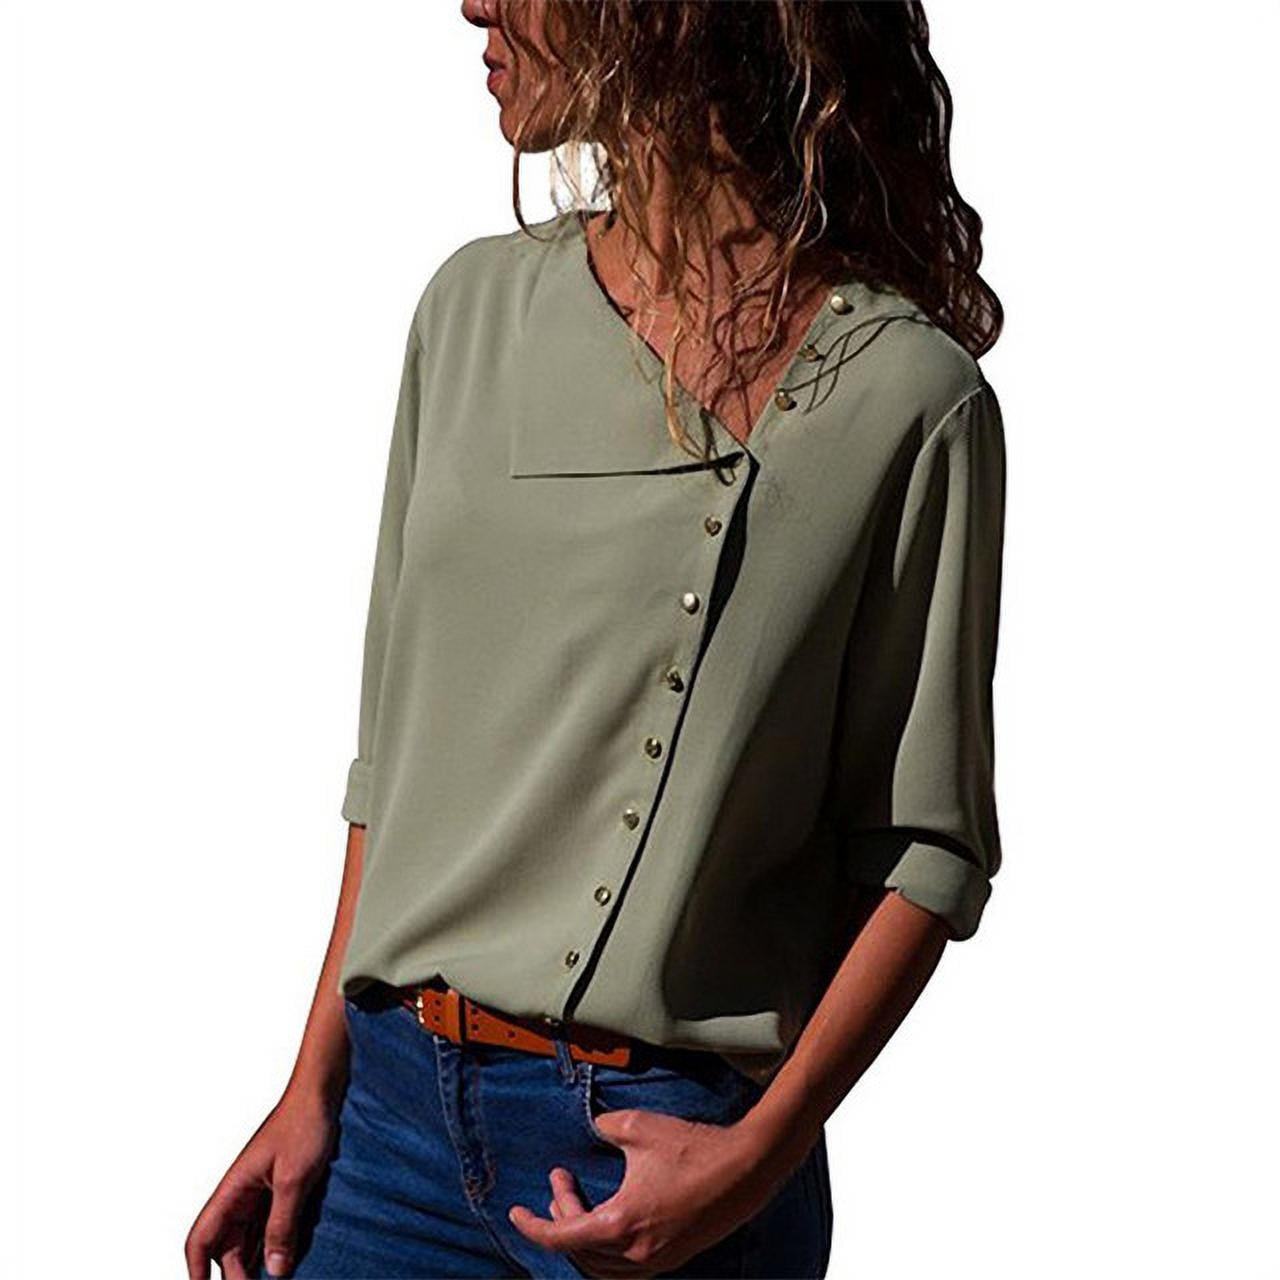 Women Blouse Shirt Cowl Neck Lace Up Panel Fashion New Long Sleeves Tunic Blouses Casual Blusas